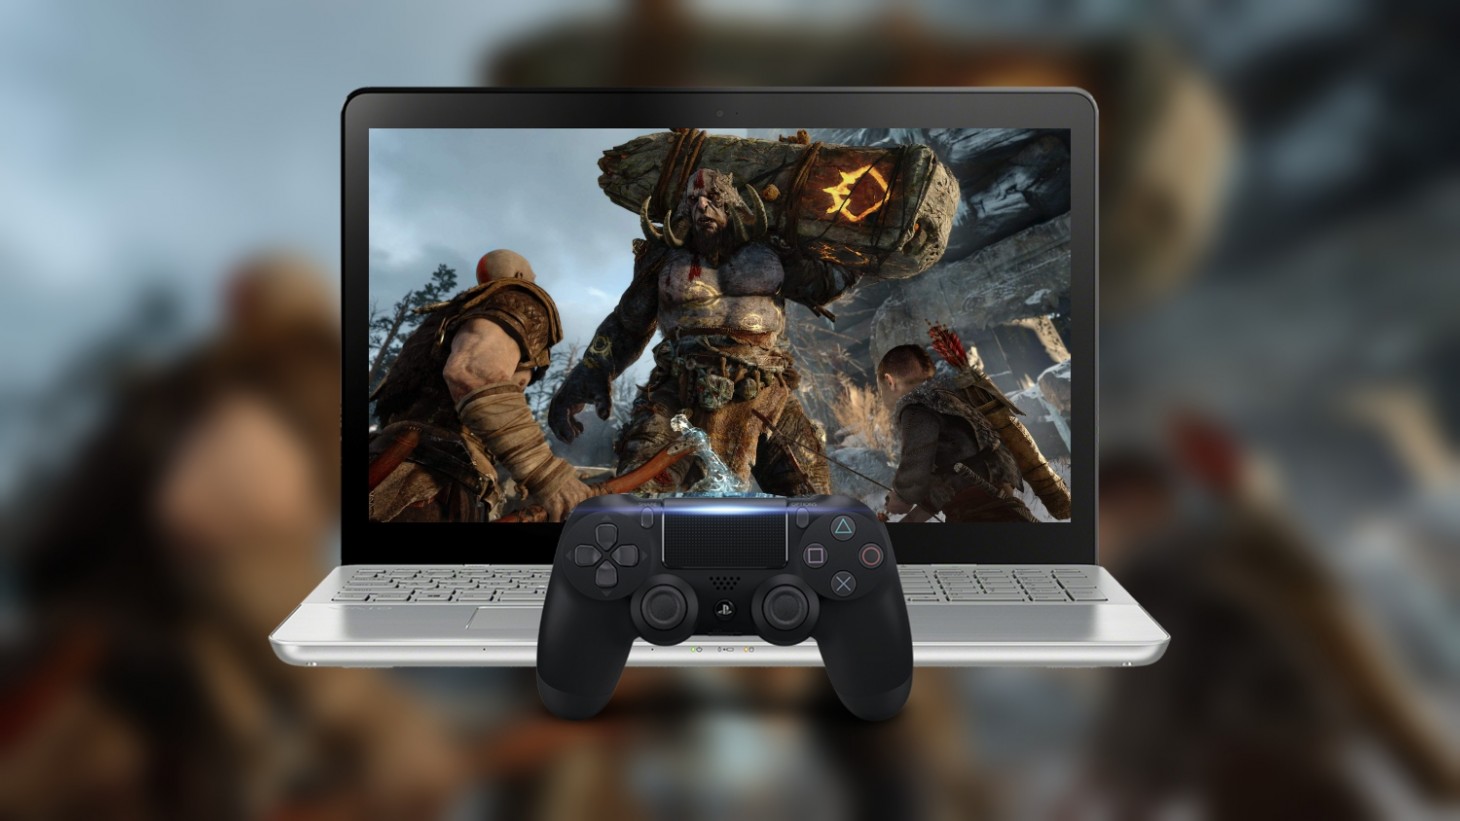 God of War looks great on PC, but don't play it with a keyboard or a mouse  - Game News 24